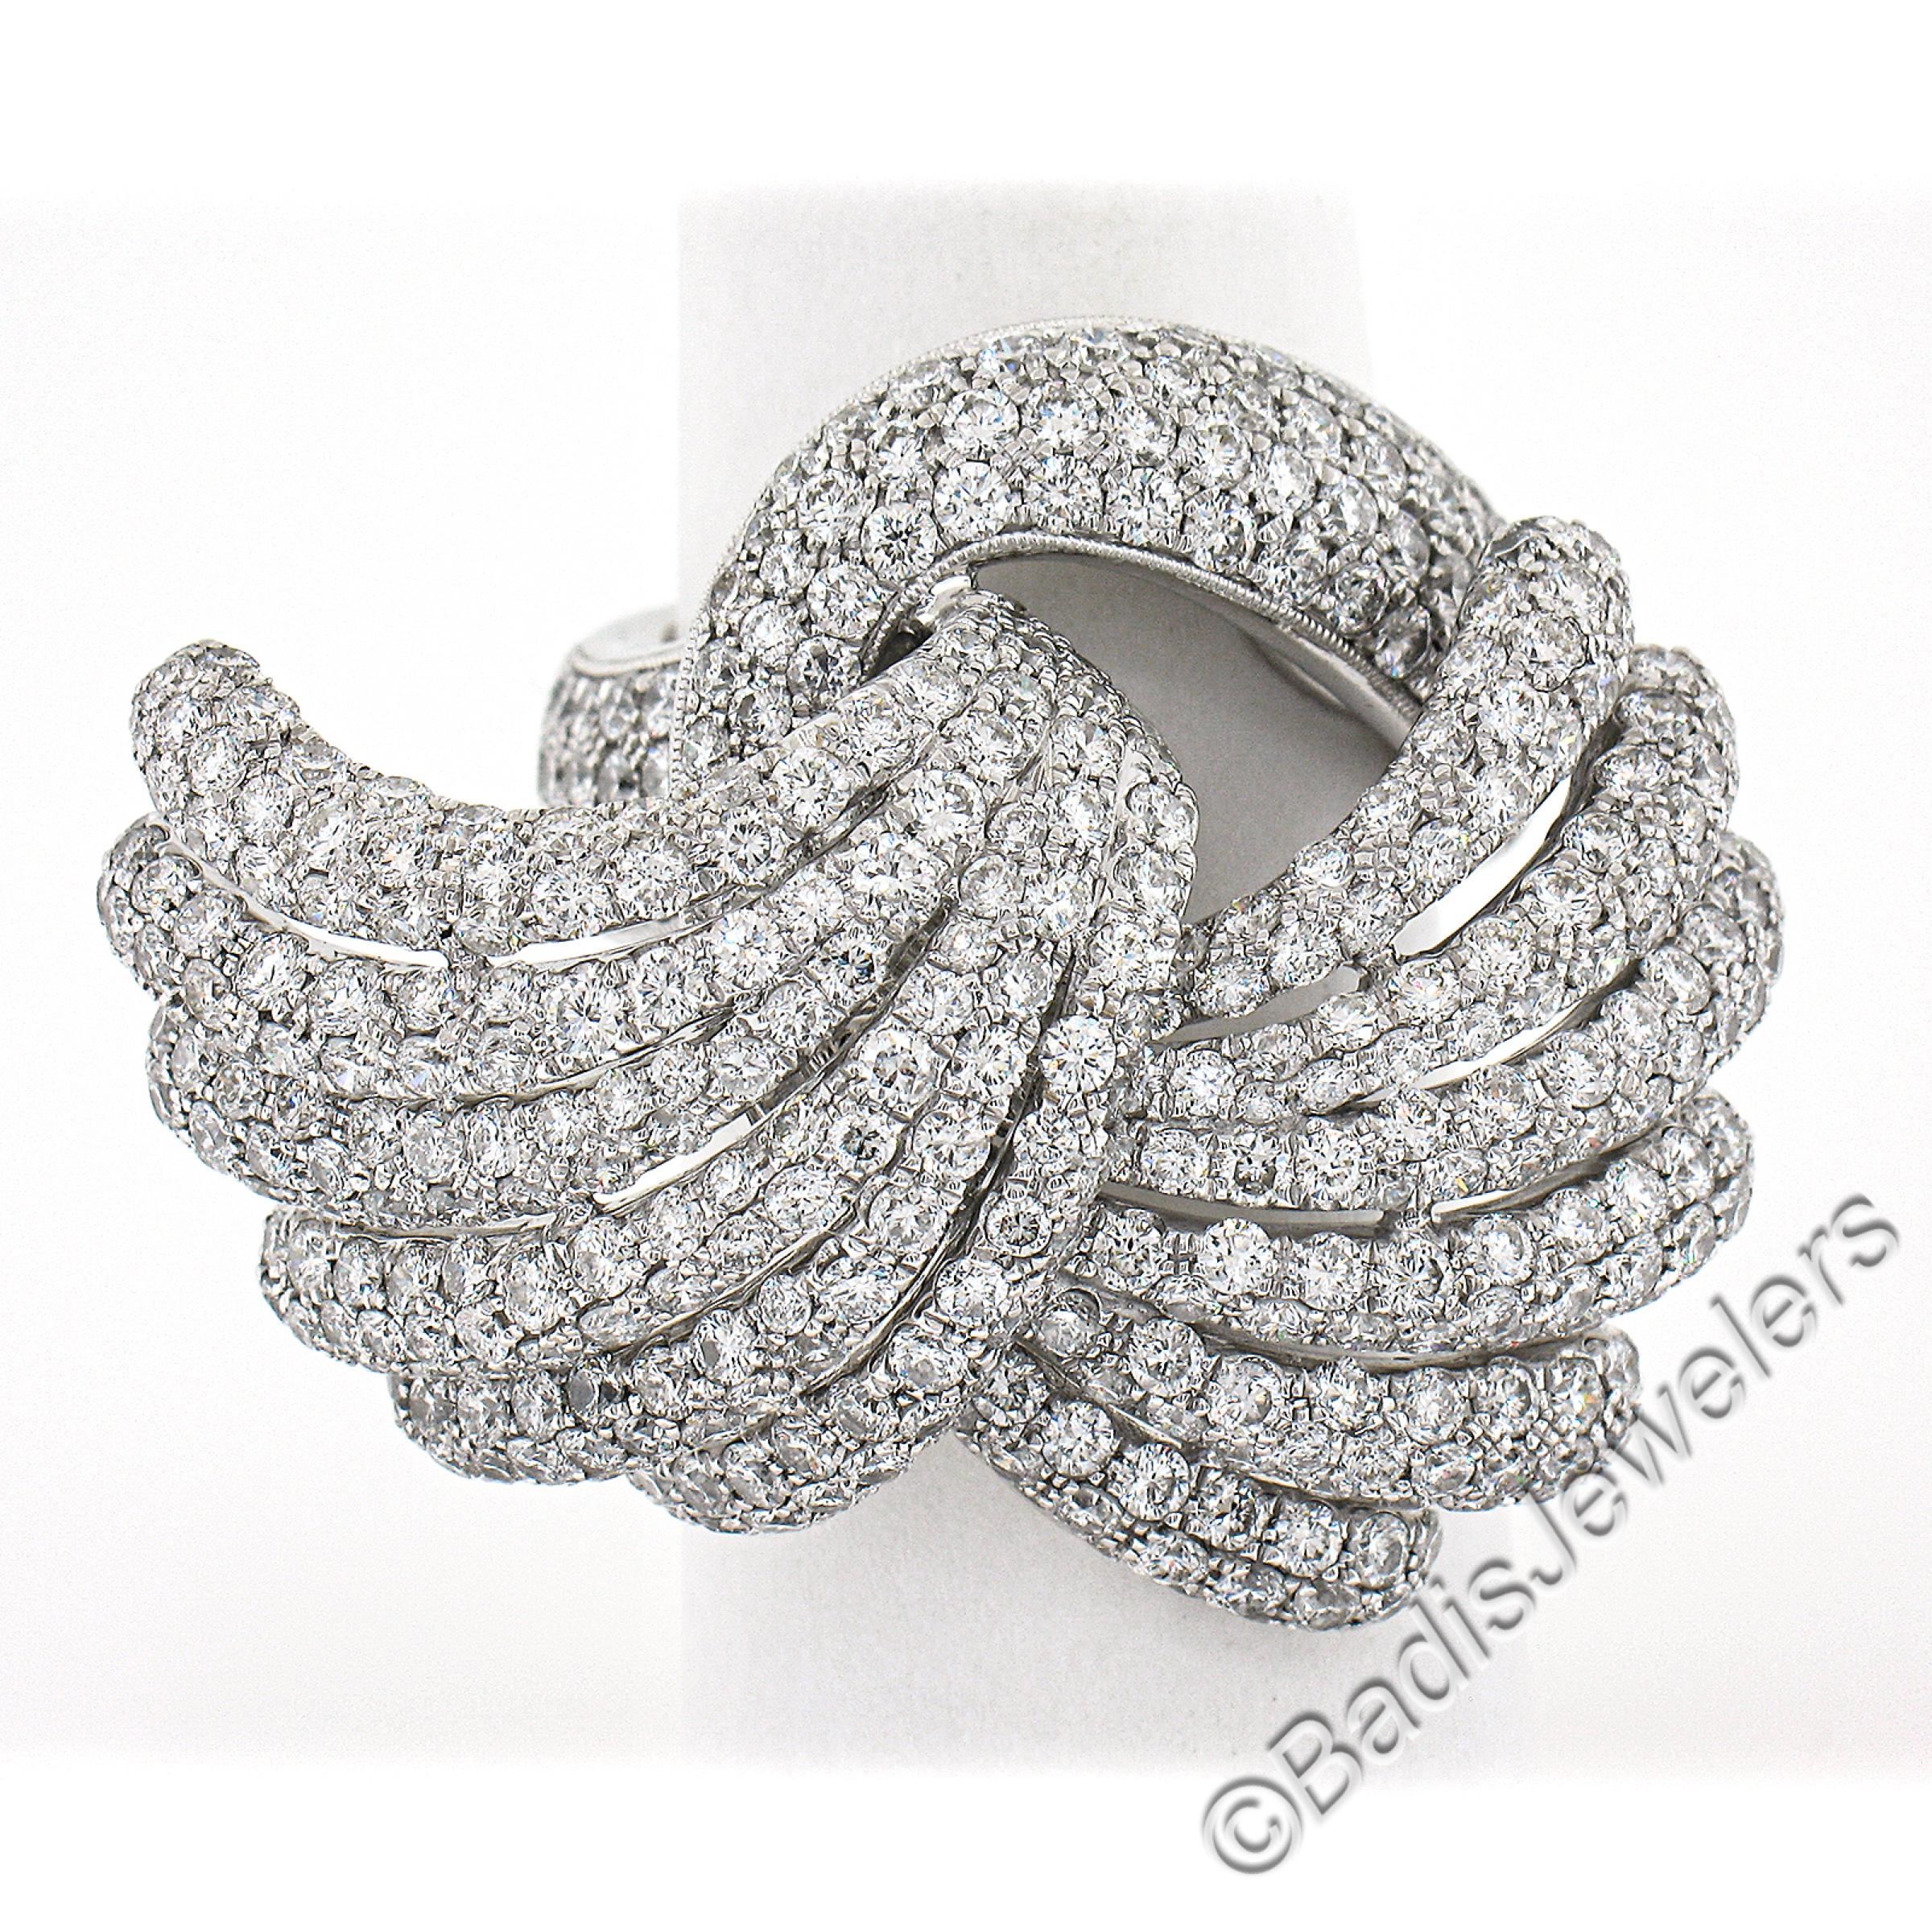 --Stone(s):--
Numerous Natural Genuine Diamonds - Round Brilliant Cut - Pave Set - F/G Color - VS1/VS2 w/ Few SI1 Clarity
Total Carat Weight:	7.60 (exact, stamped)

Material: 18K Solid White Gold
Weight: 23.42 Grams
Ring Size: 6.5 (Fitted on a